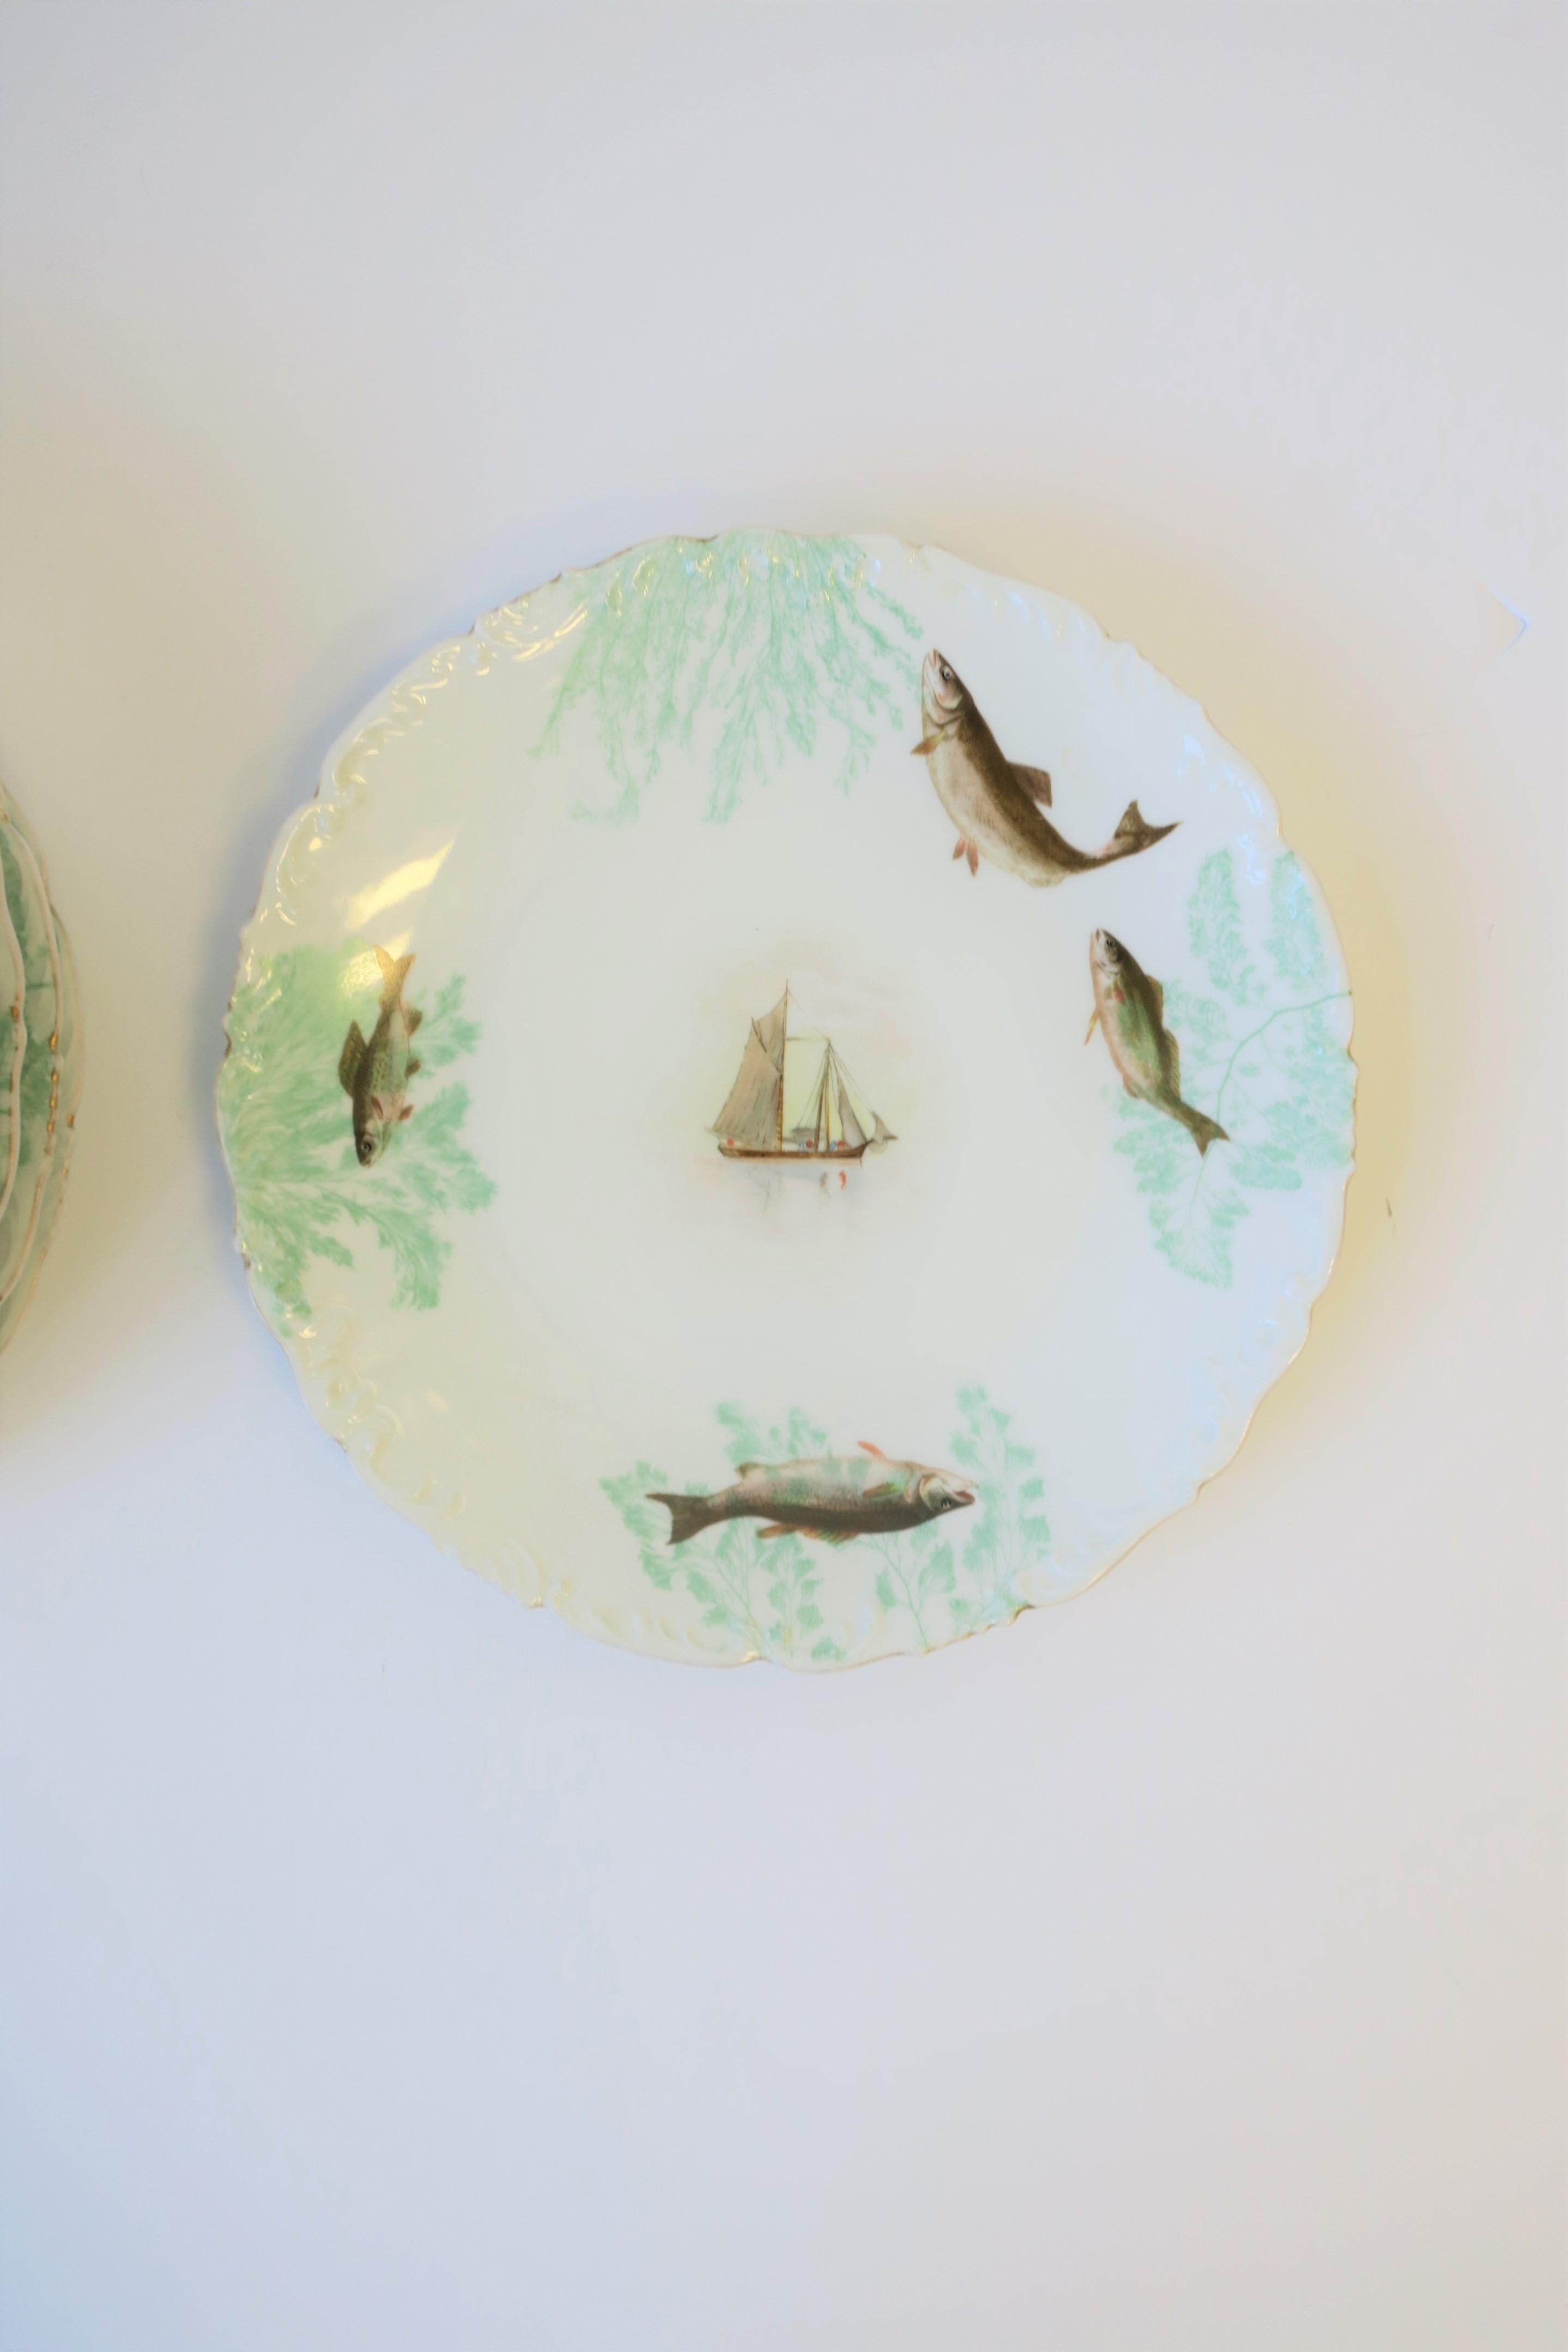 French Limoges Porcelain Dinner Plates with Rustic Fish & Boat Design, Set of 8 For Sale 2